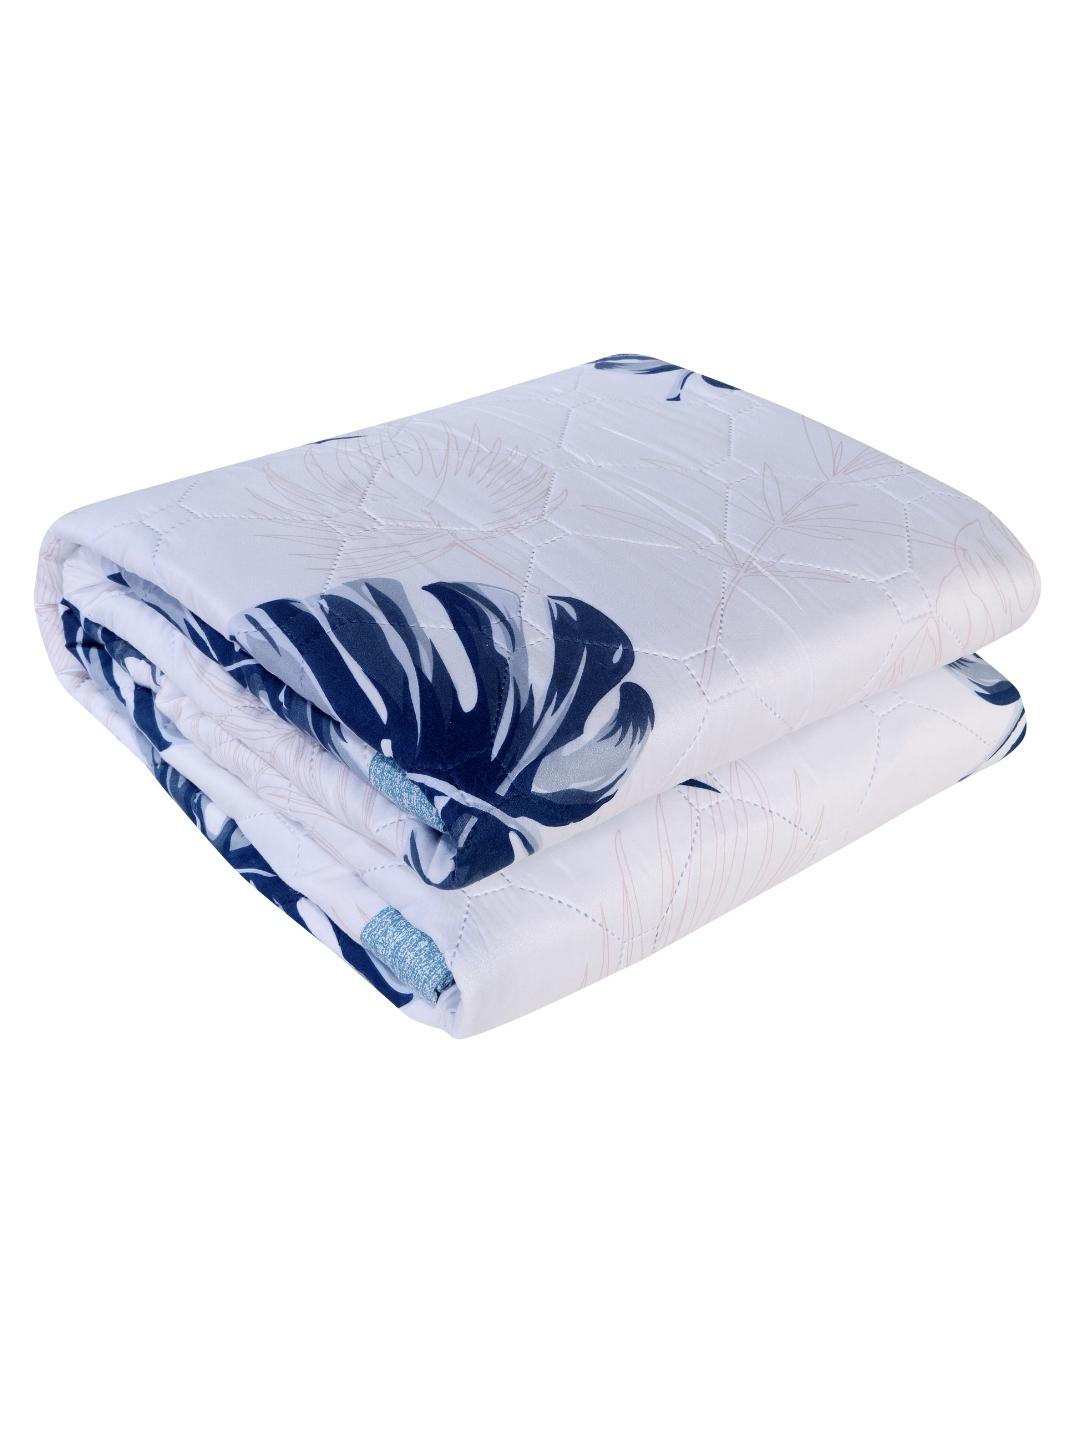 Floral Print Double Bed Light Weight Comforter-Blue and Multicolor